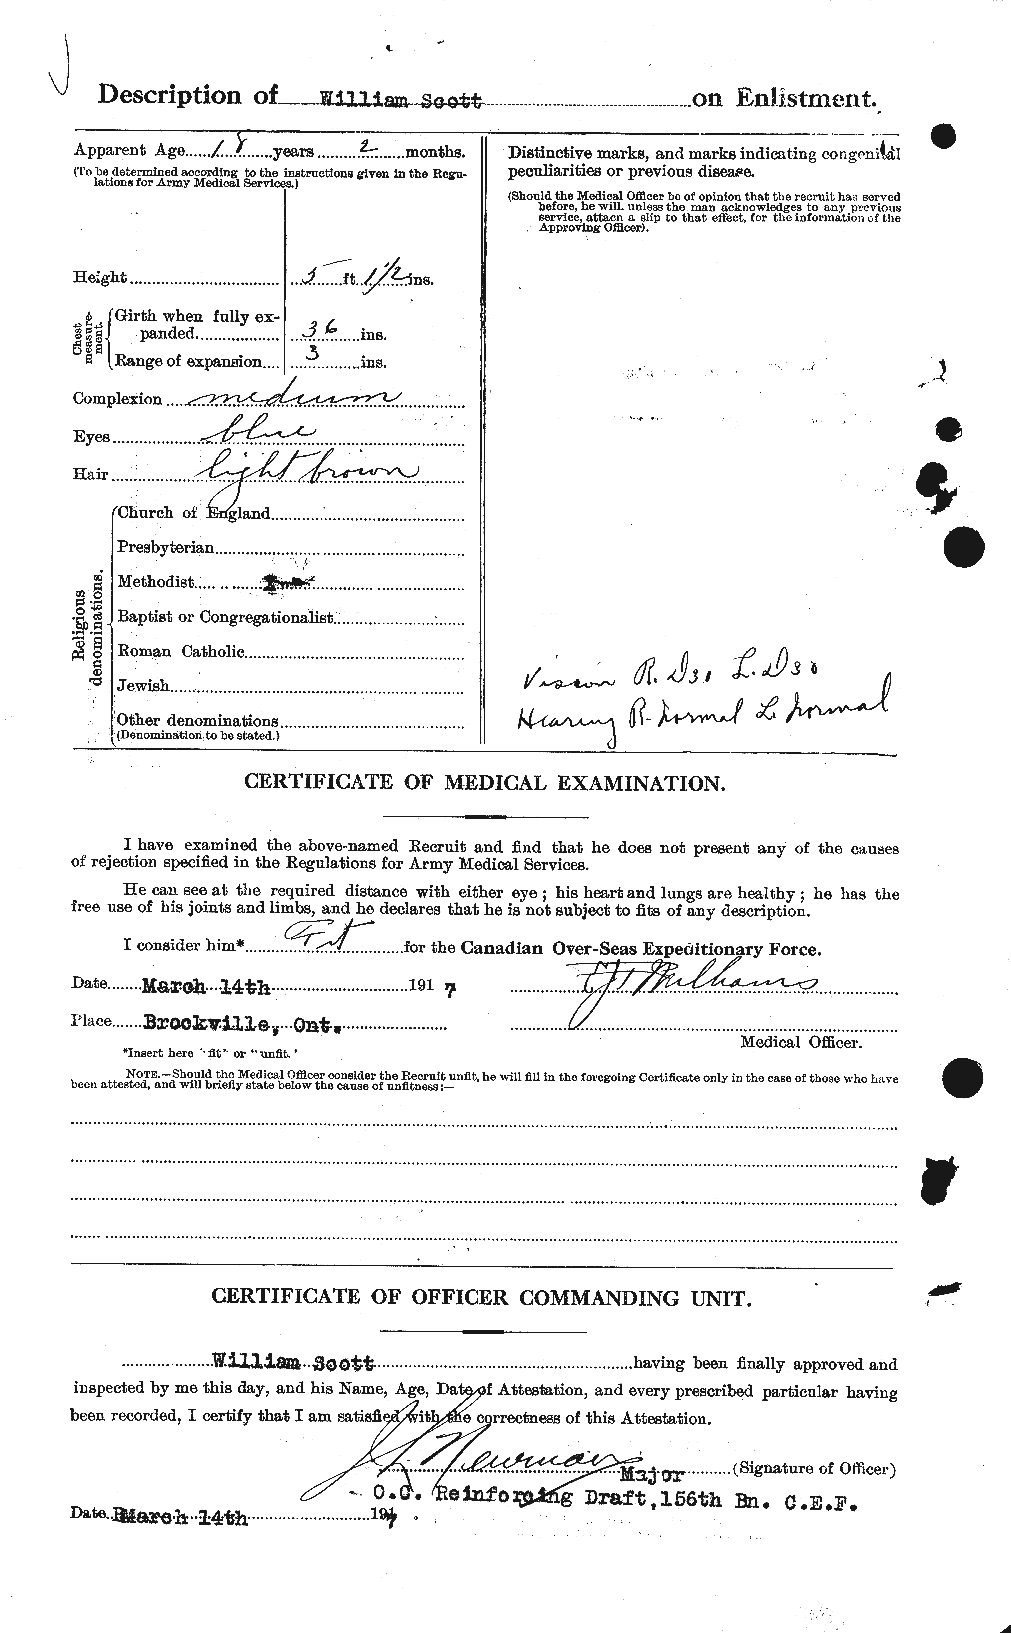 Personnel Records of the First World War - CEF 087663b